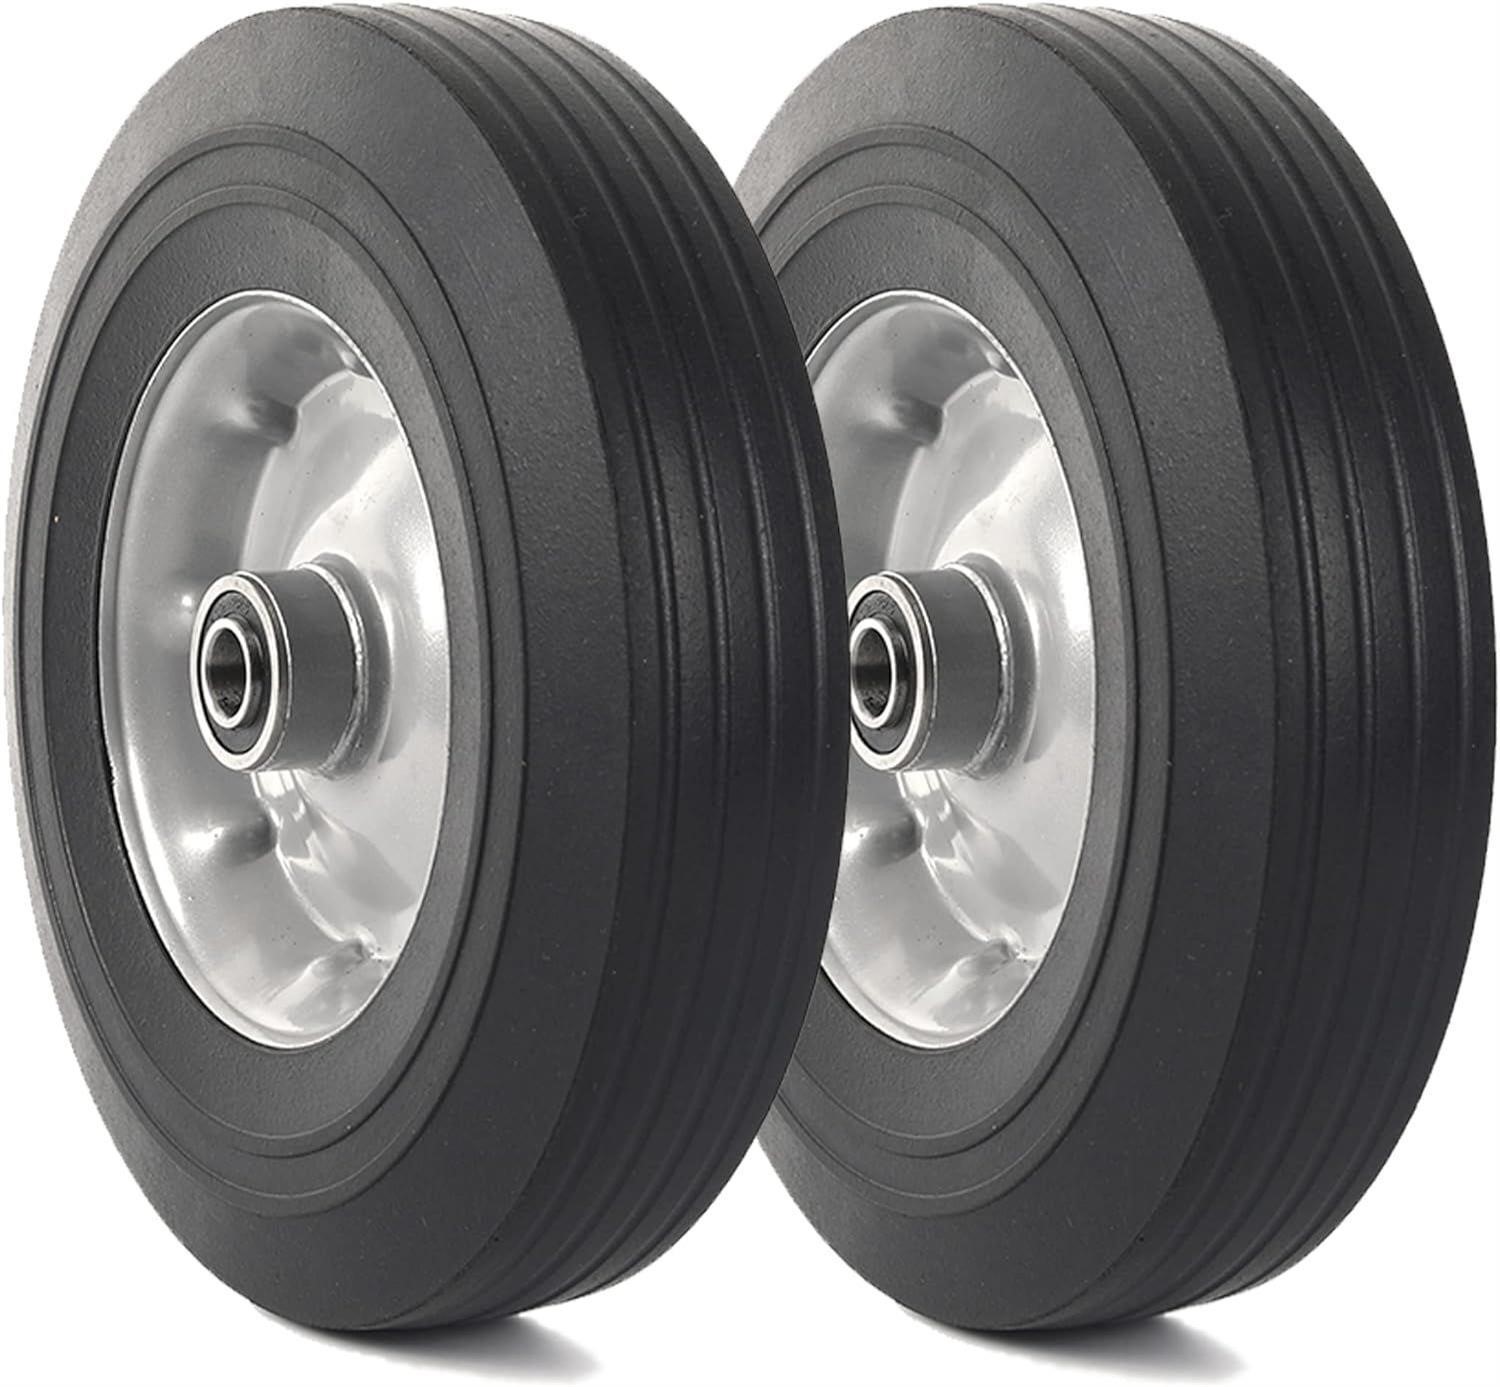 $80 4PK 10''x2.5'' Rubber Replacement Tires